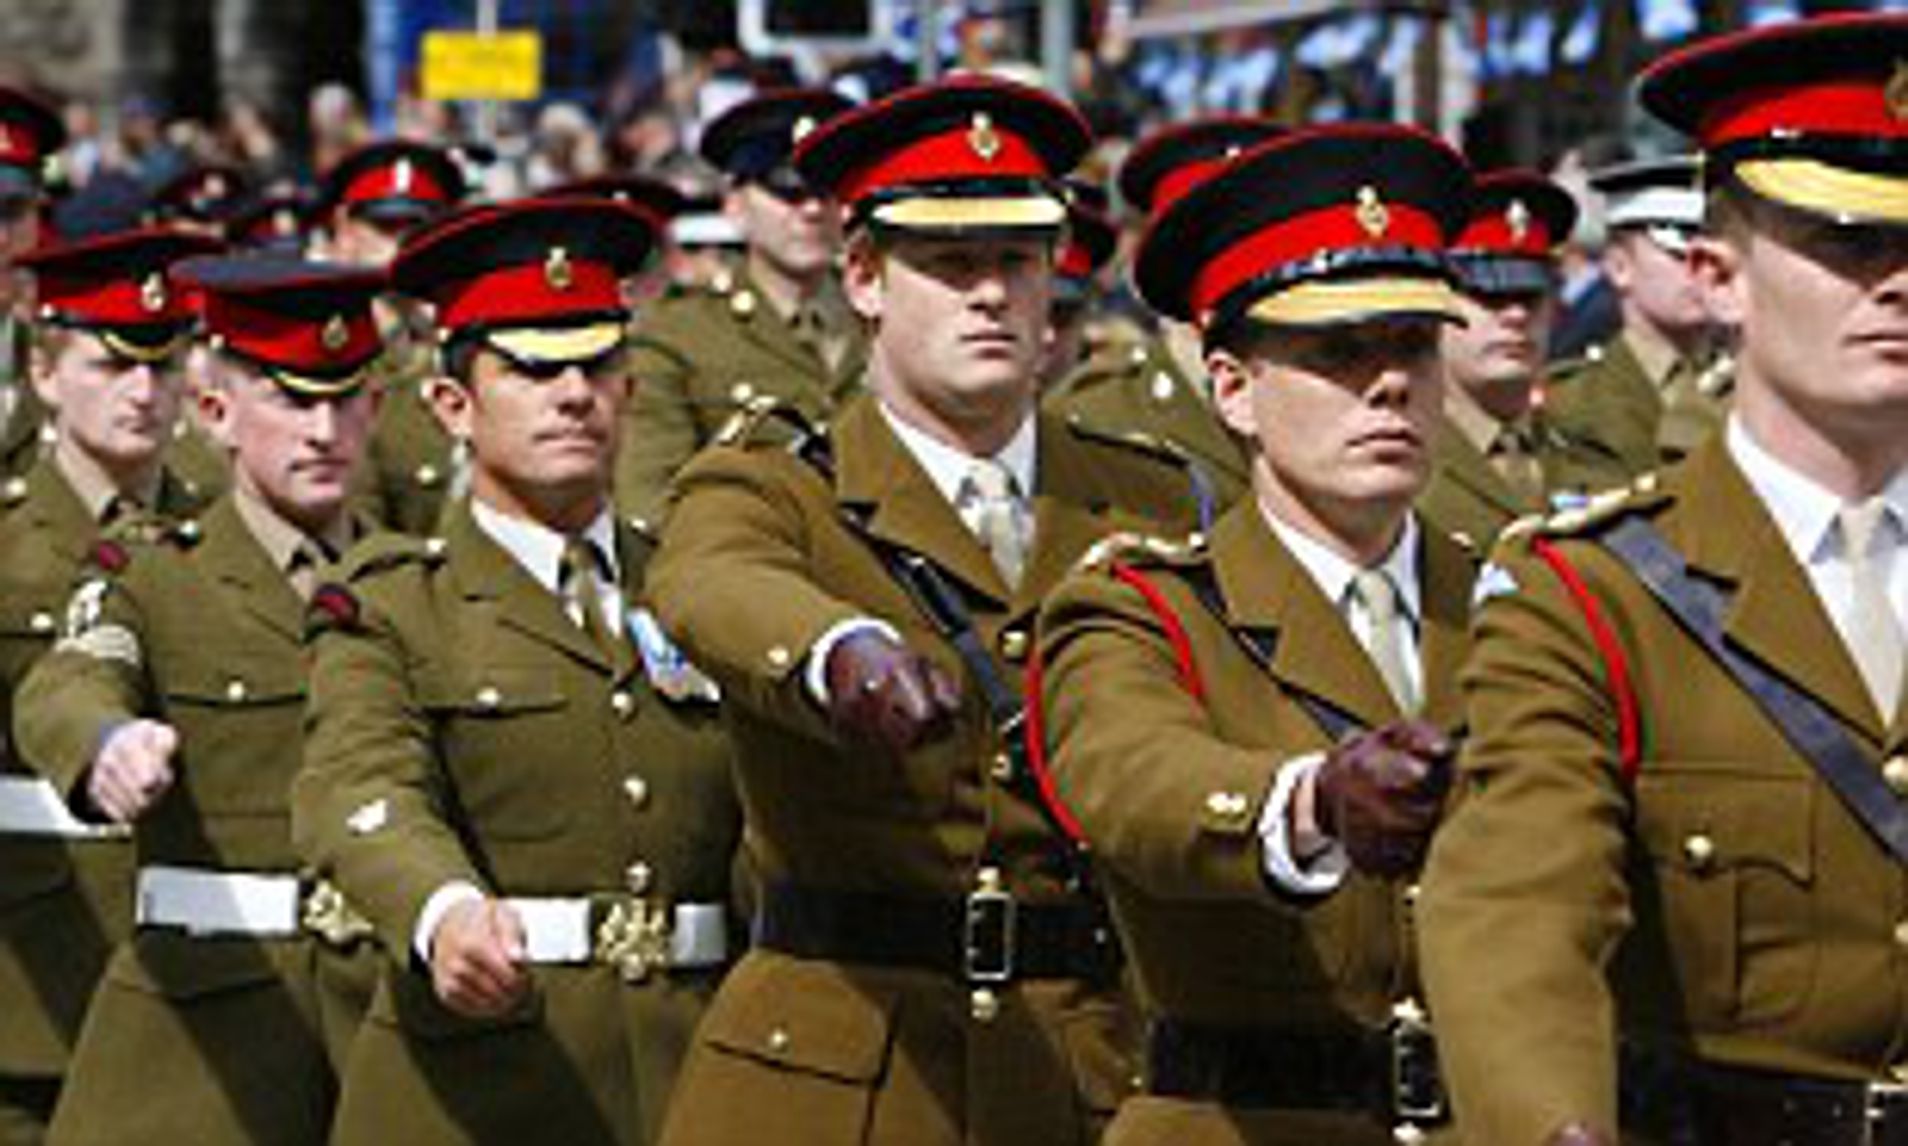 uk military uniforms unraveling the mystery of funding